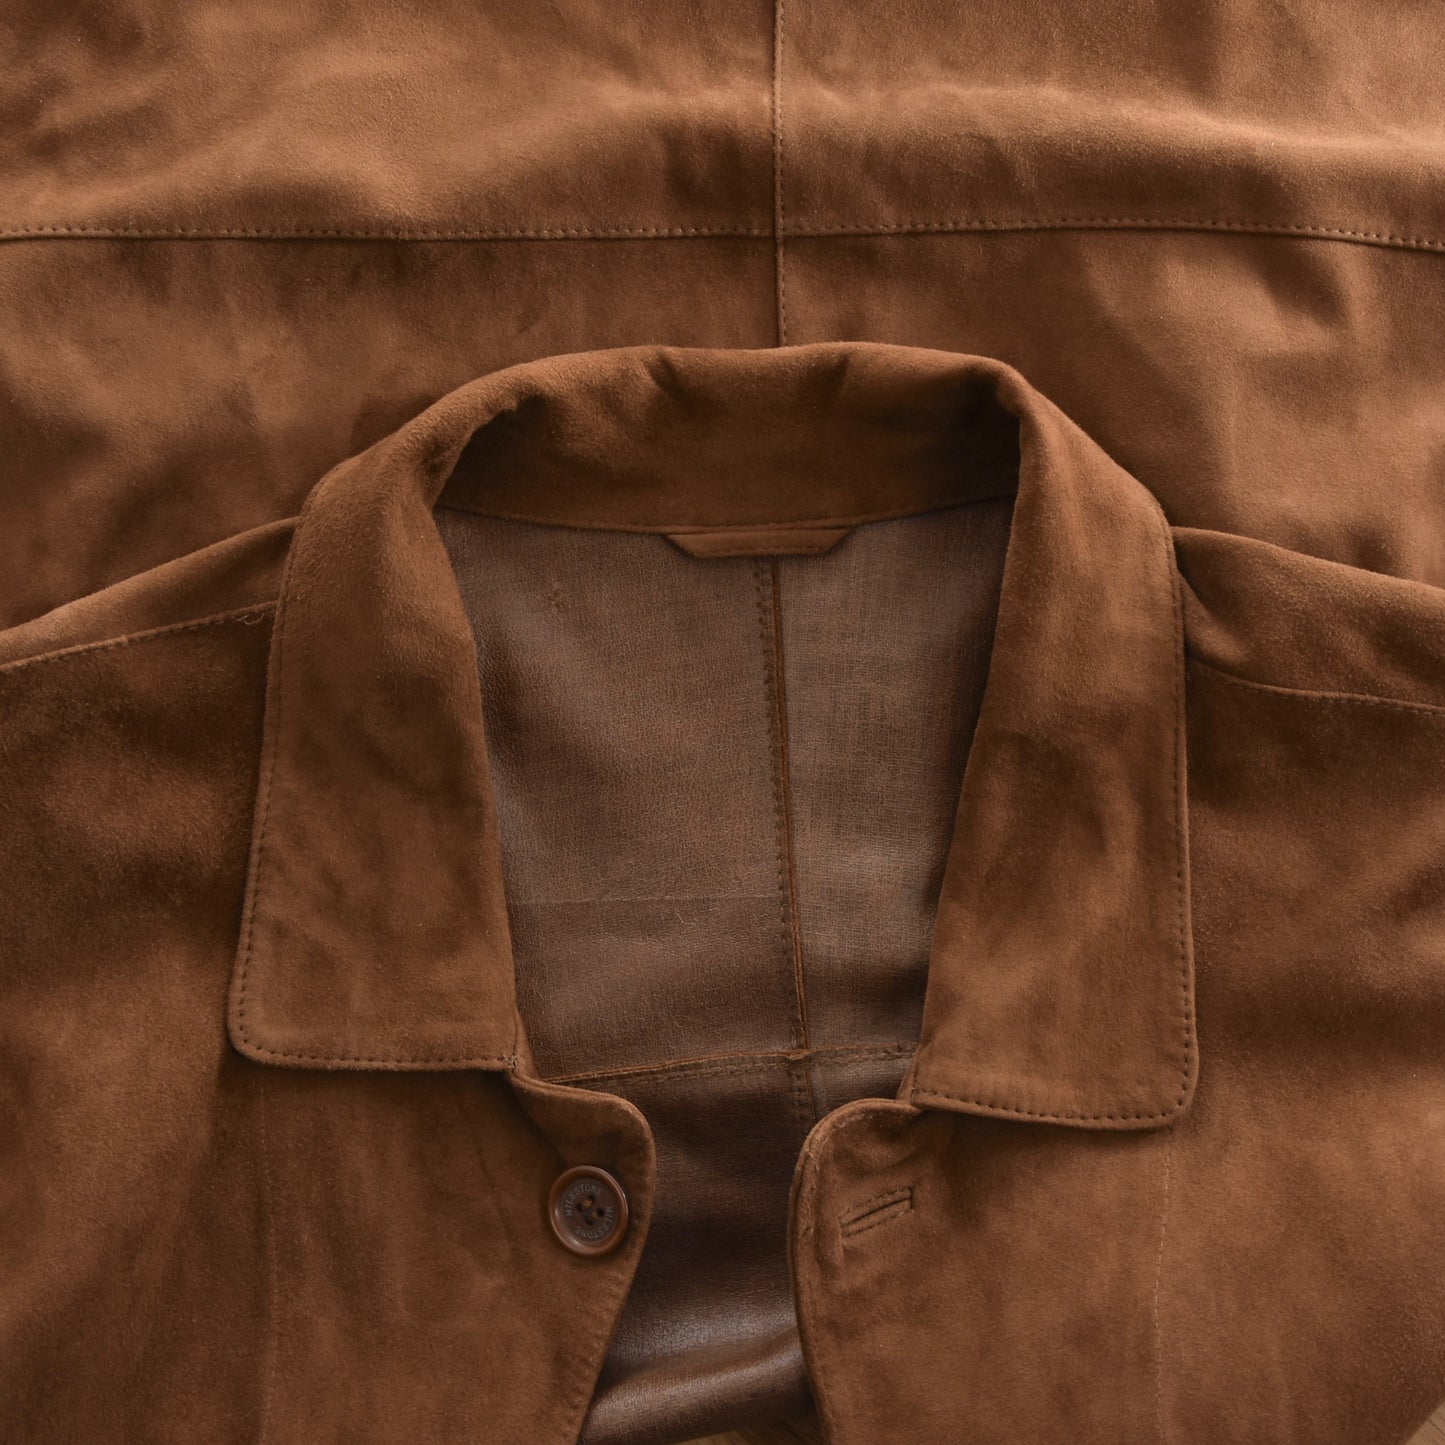 Milestone Goat Suede Leather Coat Size 54 - Brown